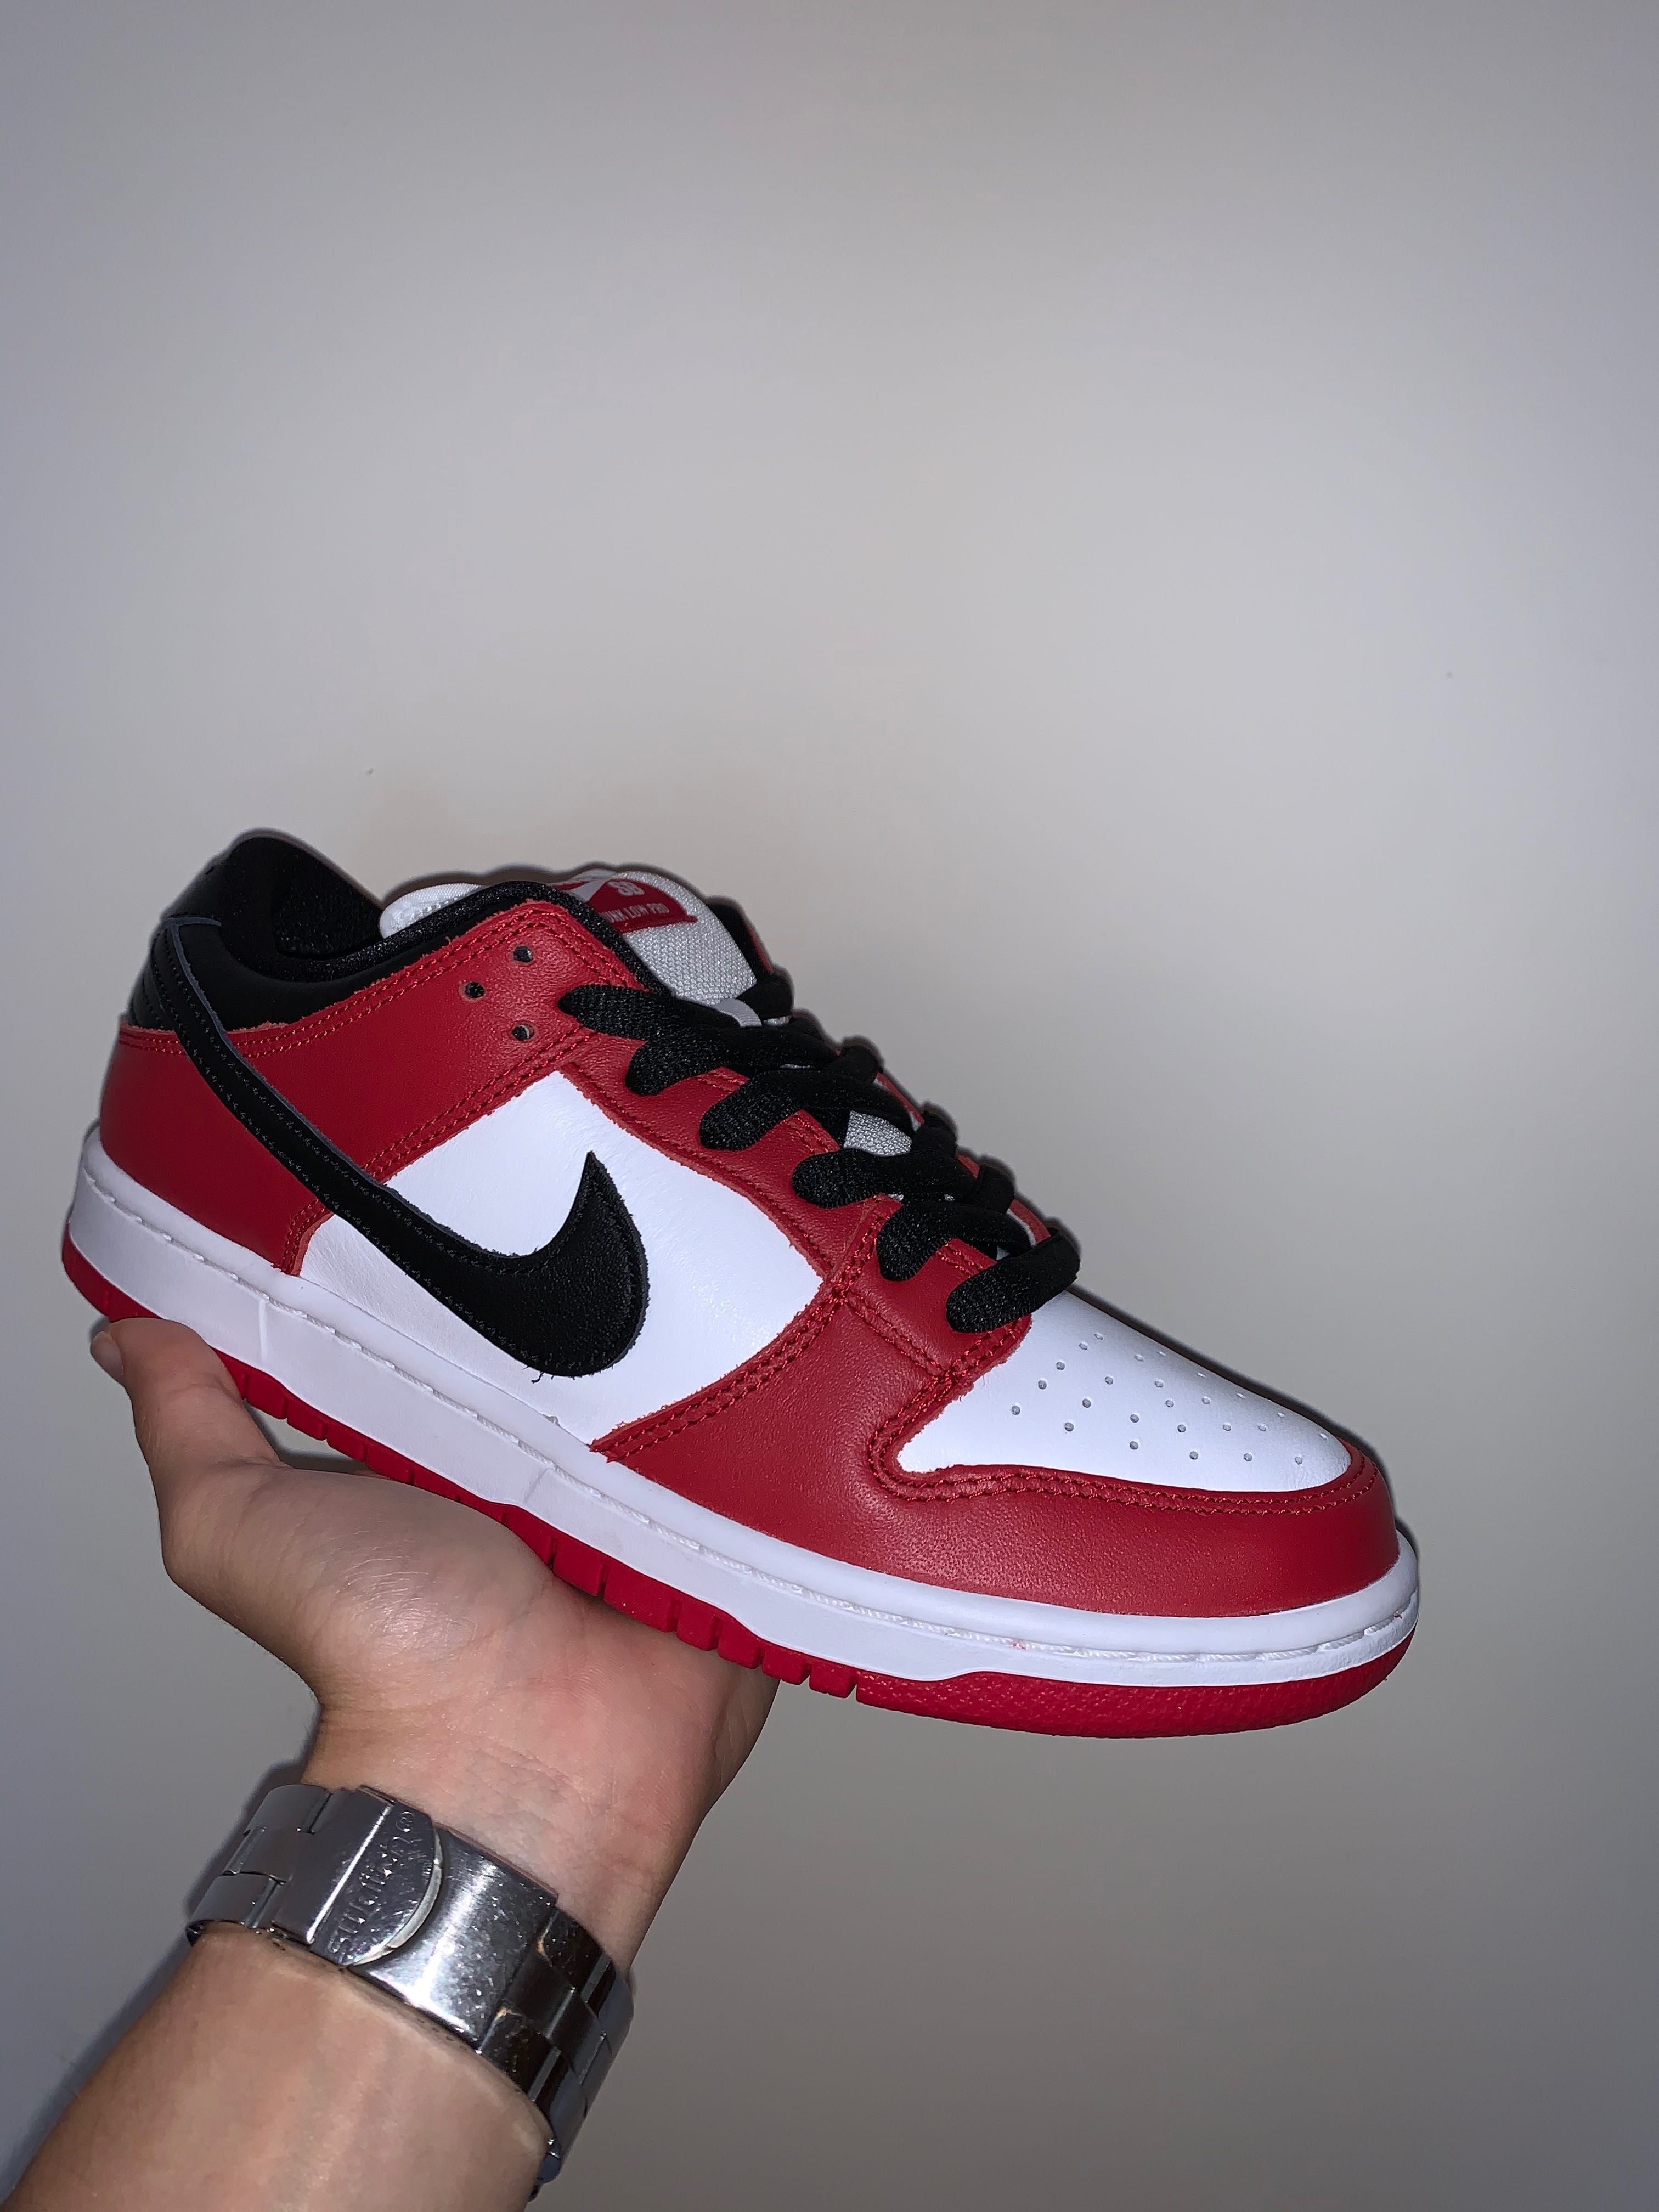 Nike SB Dunk Low J-pack Chicago/Varsity Red and White - EUR40.5